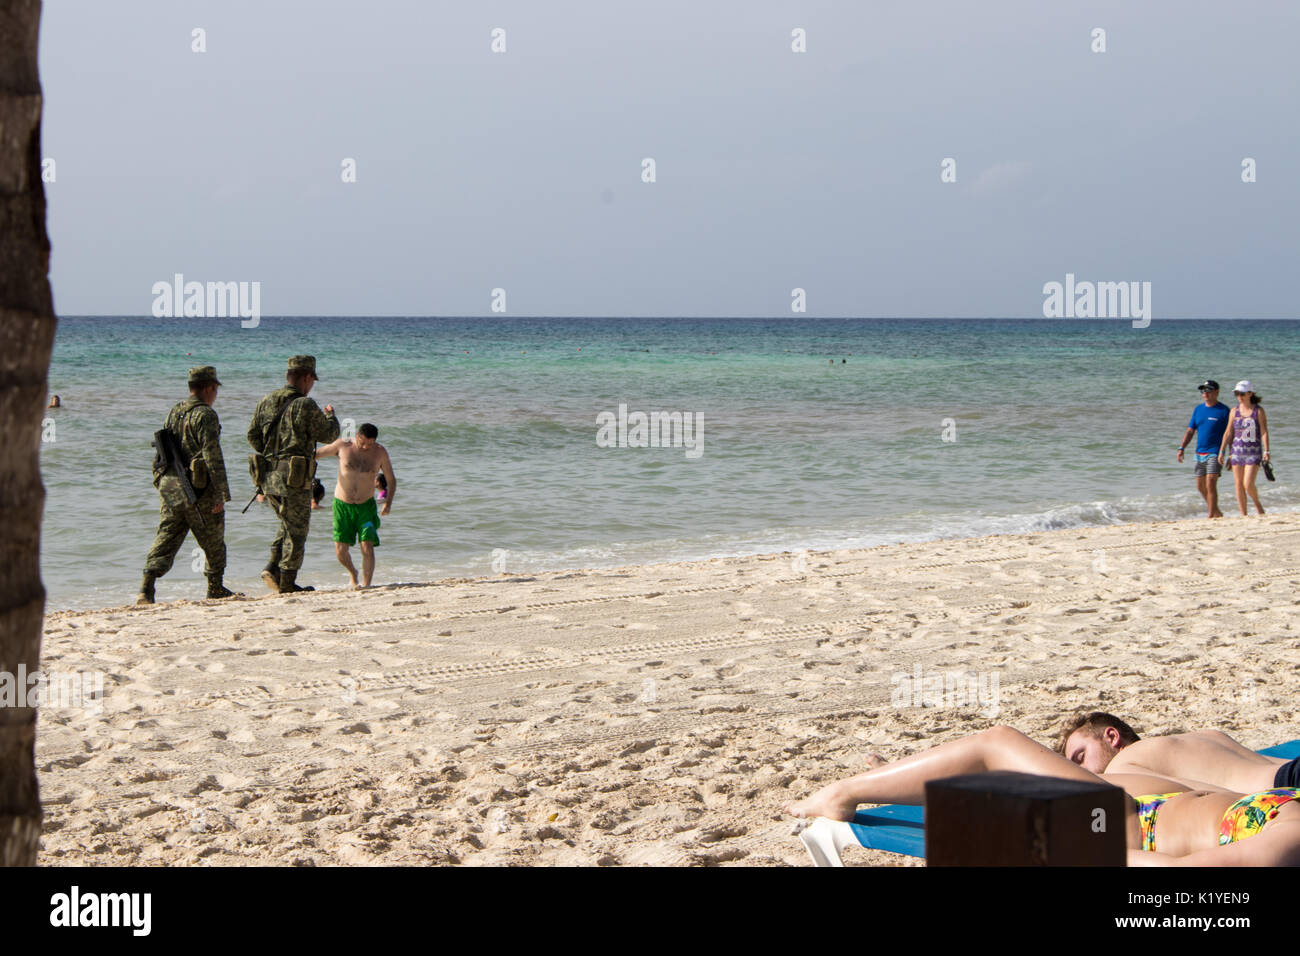 Two armed Mexican soldiers in camouflaged uniforms walking along Caribbean beach with tourists in sim wear ignoring them. Stock Photo